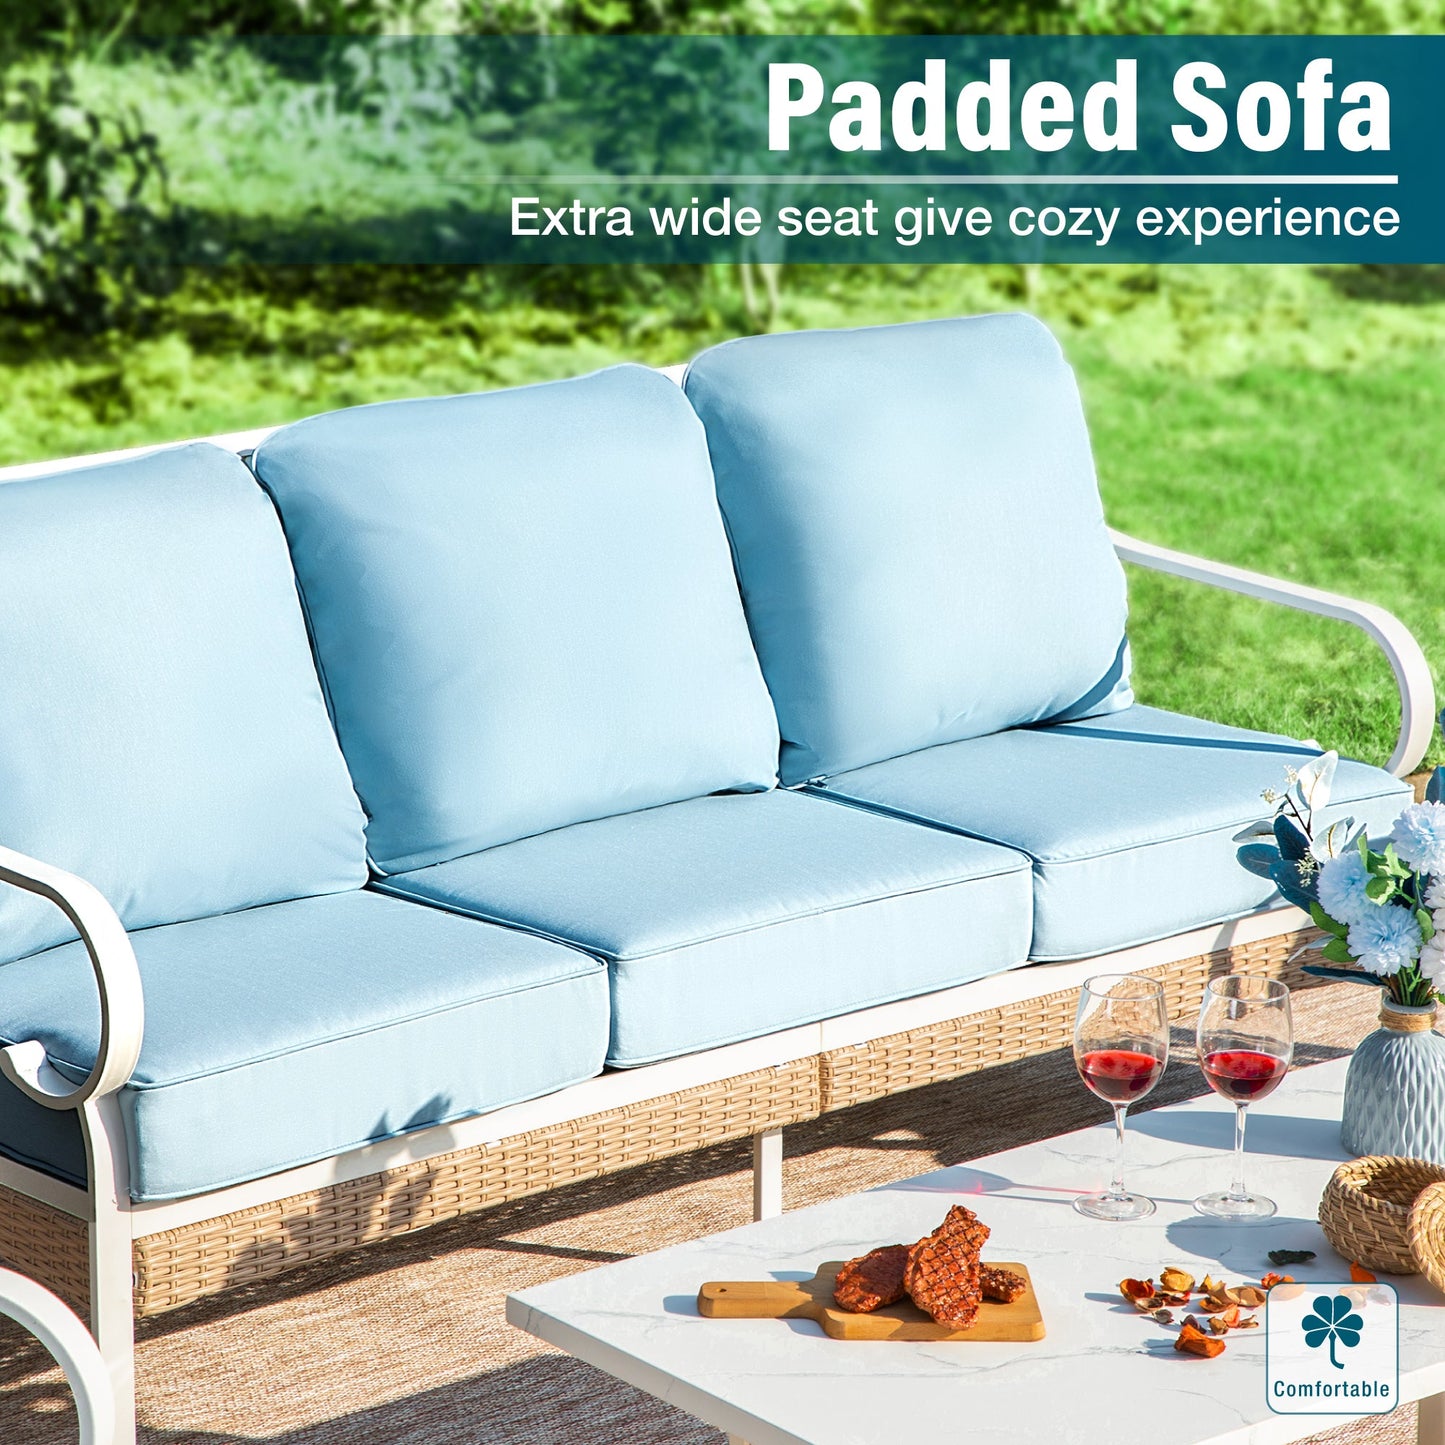 Sophia&William 6 Piece Patio Conversation Set Outdoor Furniture Sofa Set with Fixed & Rocking Chair, Blue